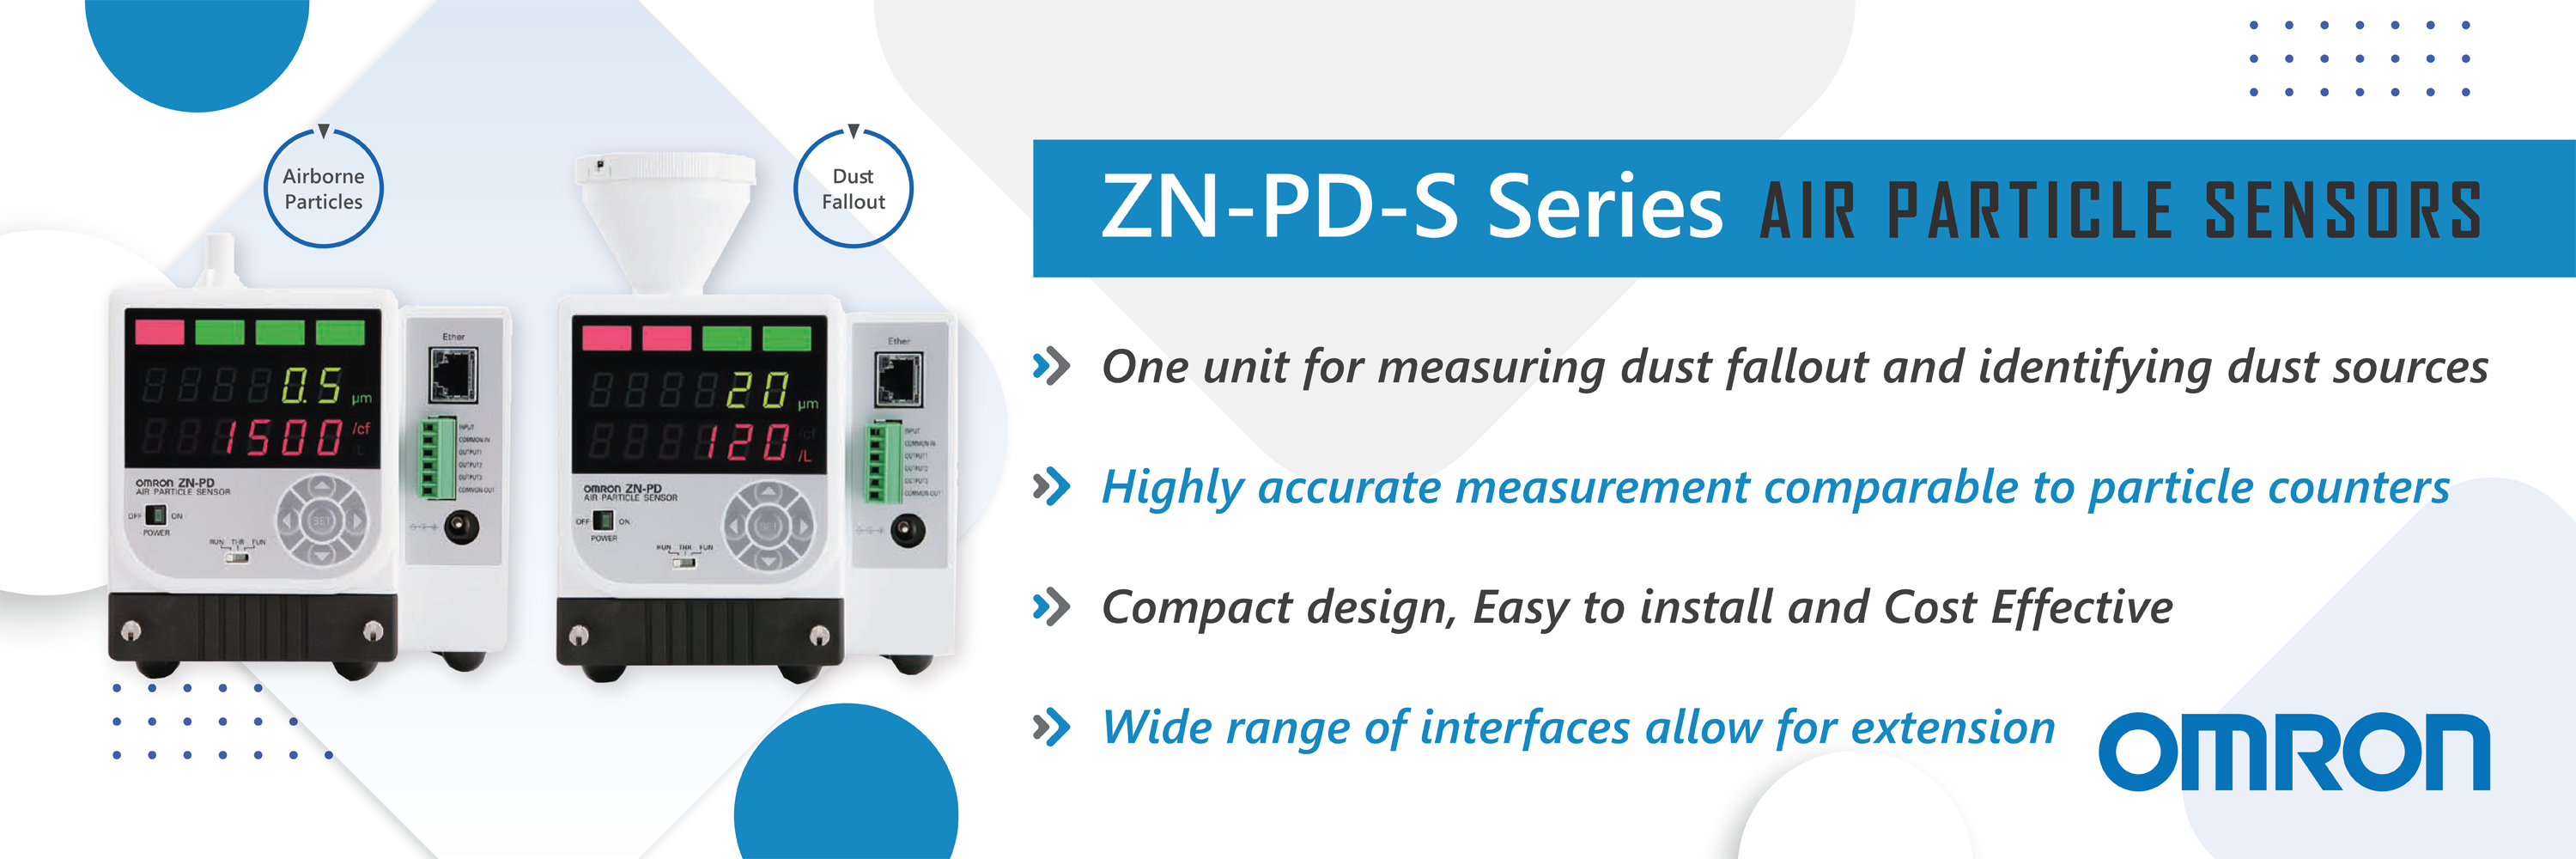 ZN-PD-S Series